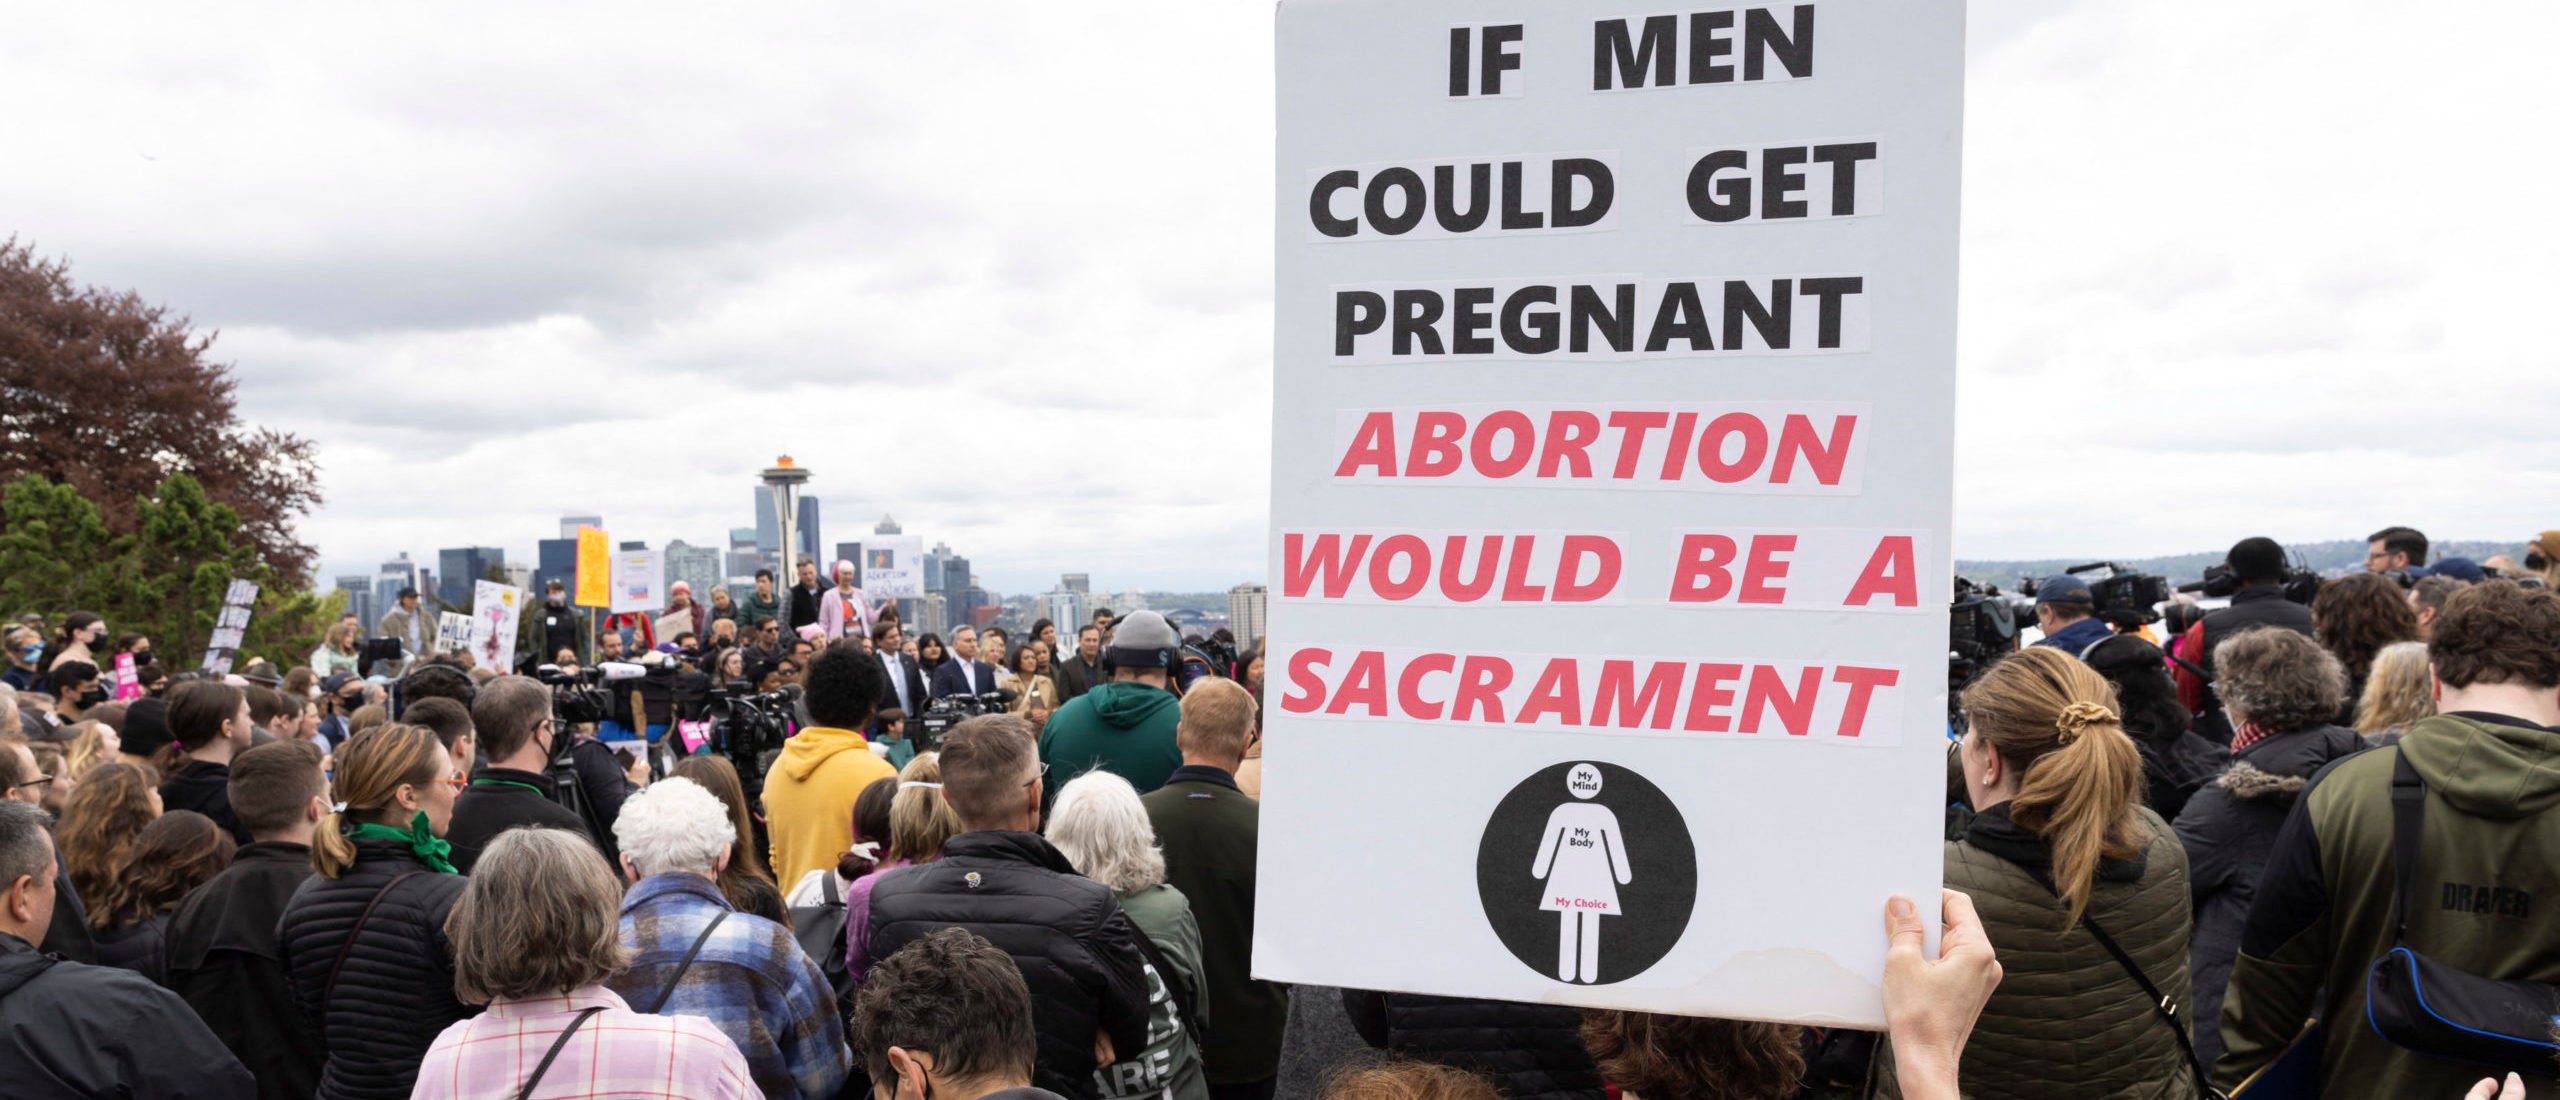 A person holds a sign that reads "if men could get pregnant, abortion would be a sacrament" during a pro-choice rally and press conference with Washington State Governor Jay Inslee and elected officials in Seattle, Washington on May 3, 2022.